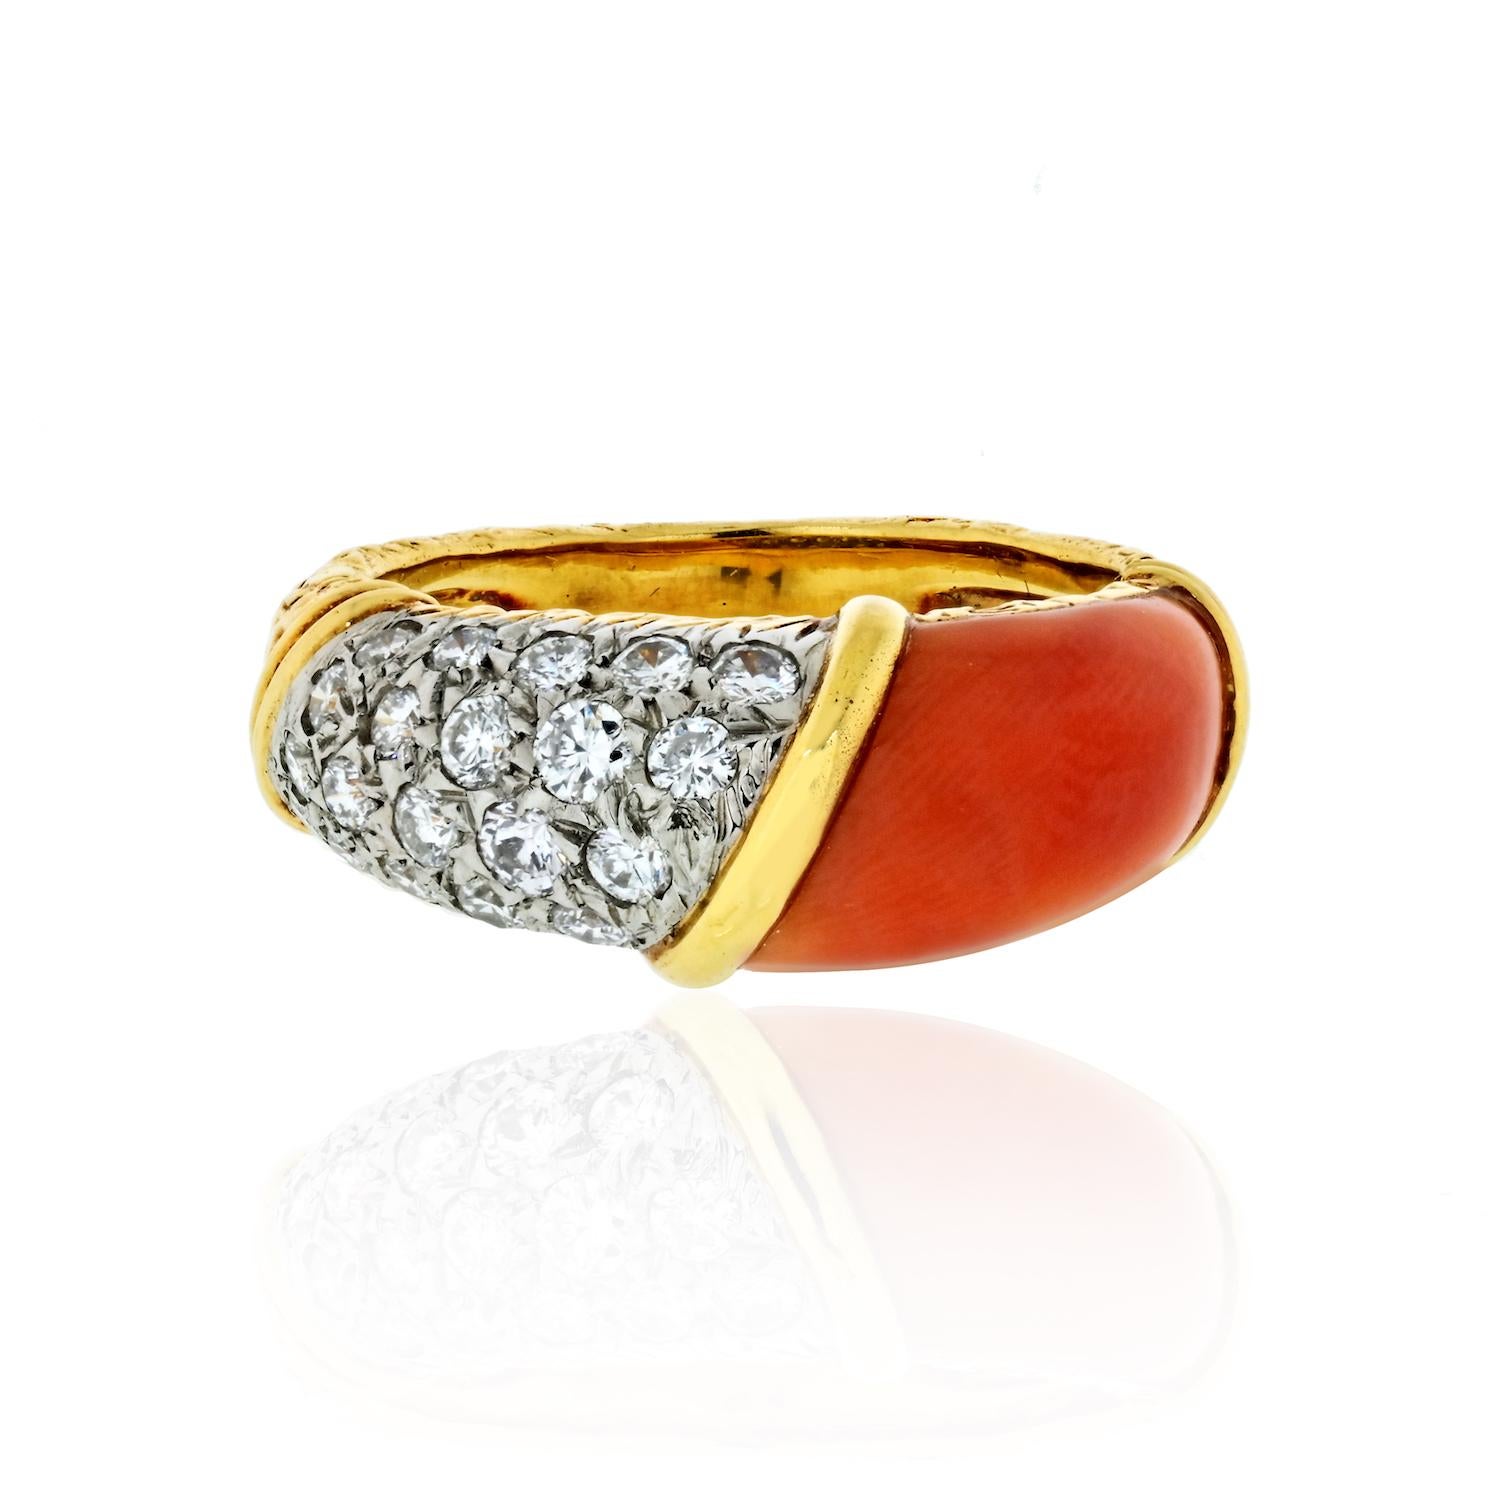 Round Cut Van Cleef & Arpels circa 1960 Coral and Diamond Band Ring